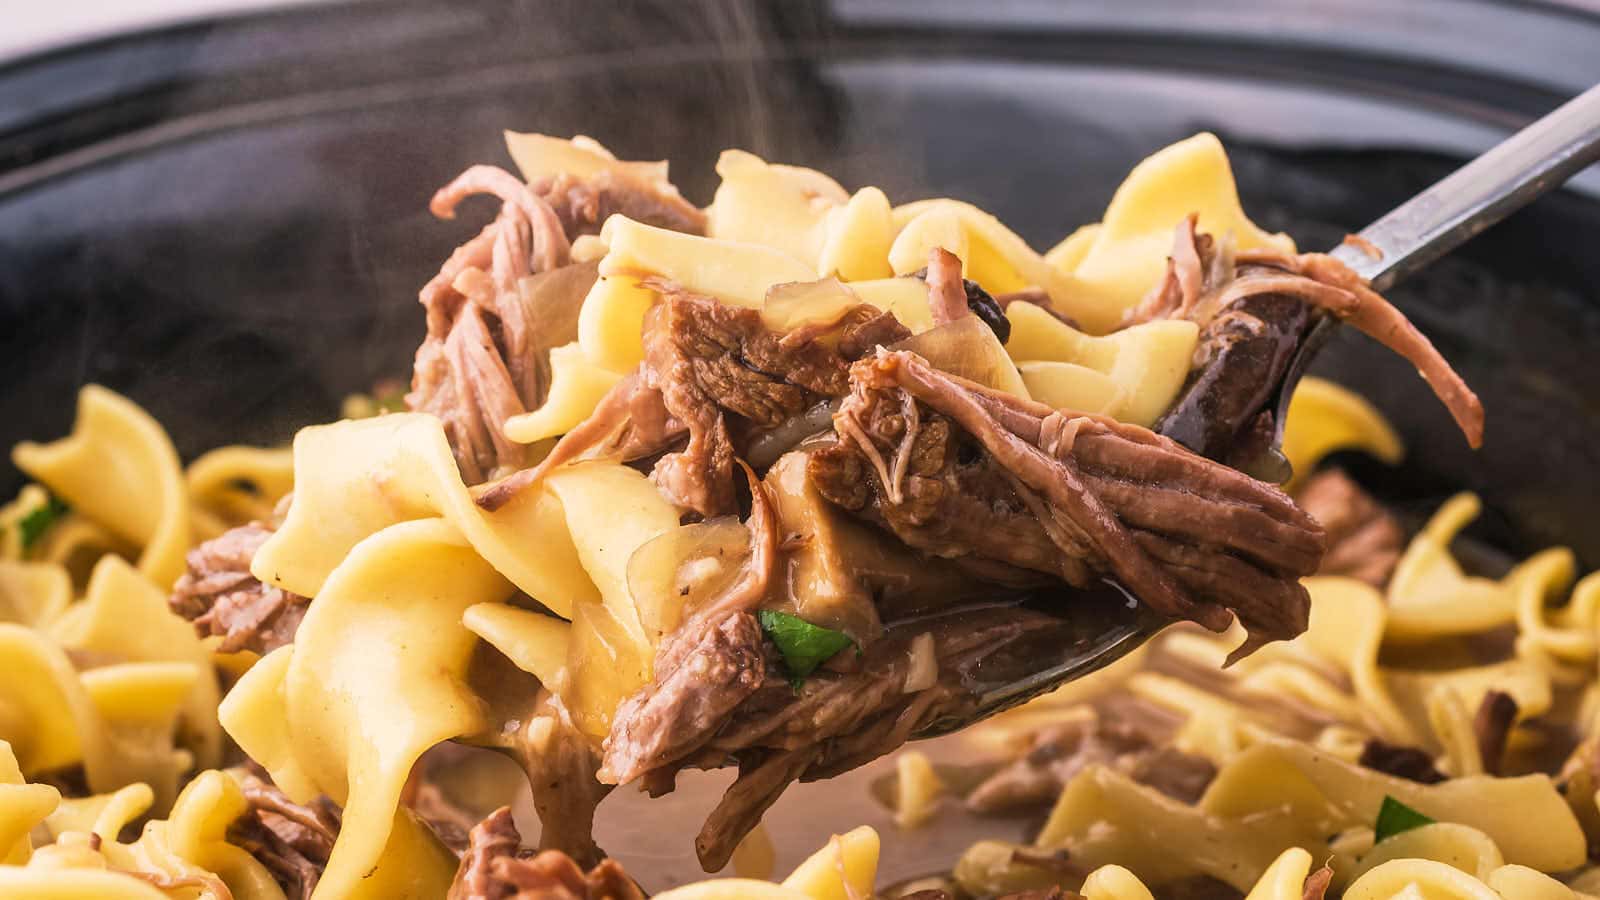 Crock Pot Beef and Noodles recipe by Cheerful Cook.